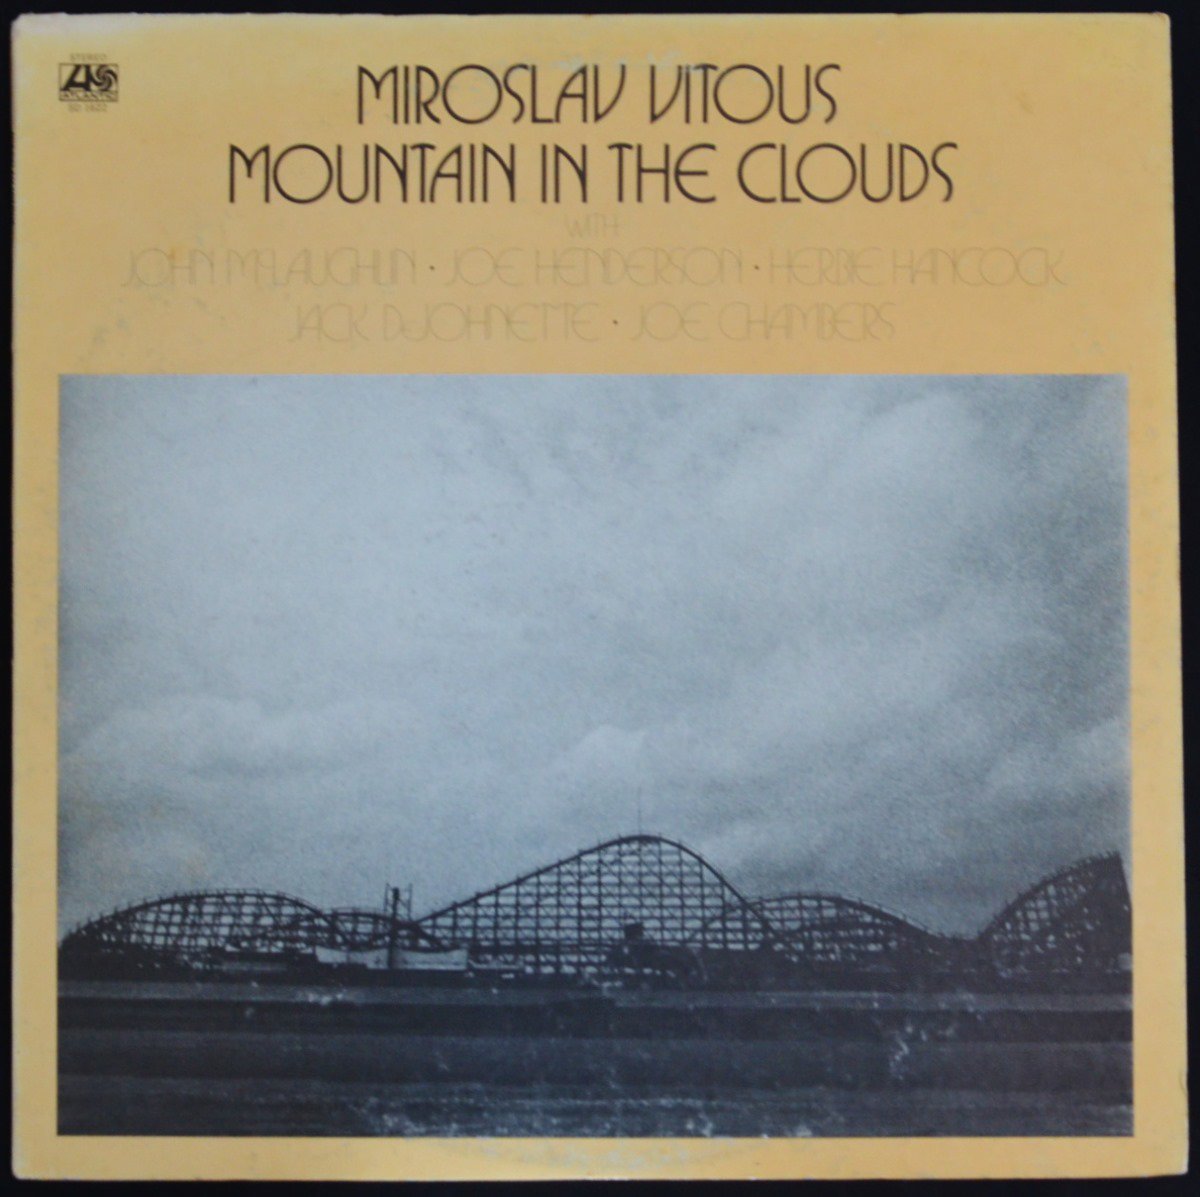 MIROSLAV VITOUS / MOUNTAIN IN THE CLOUDS (LP)